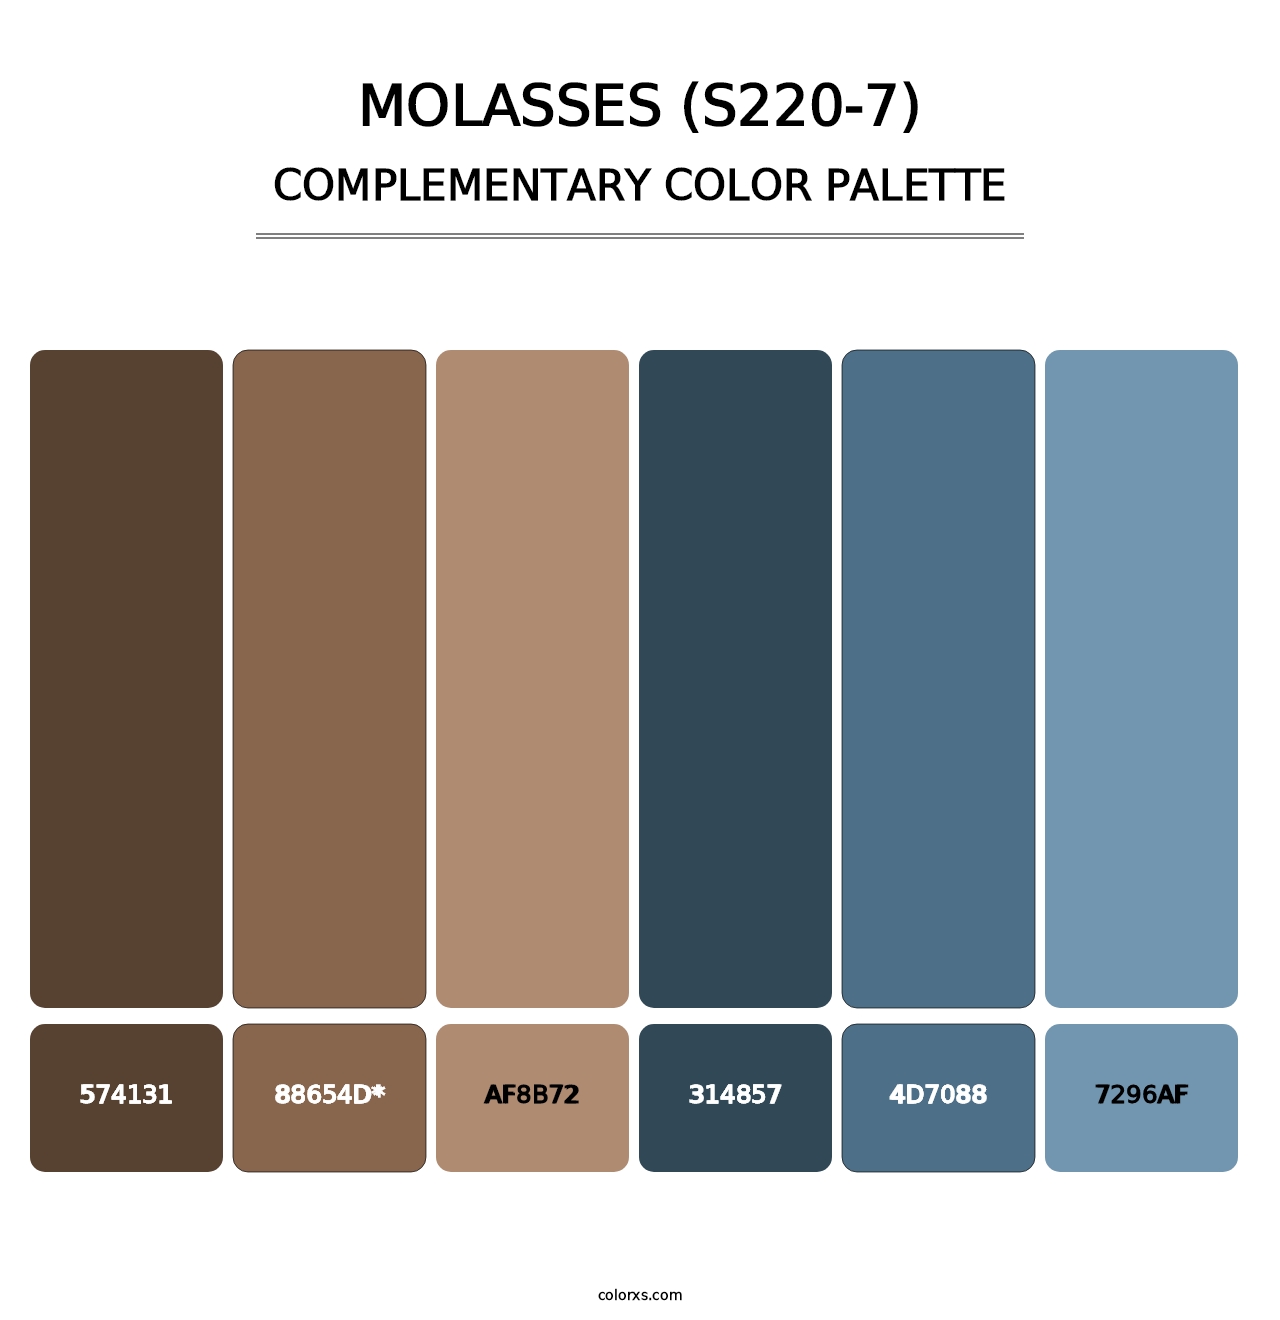 Molasses (S220-7) - Complementary Color Palette